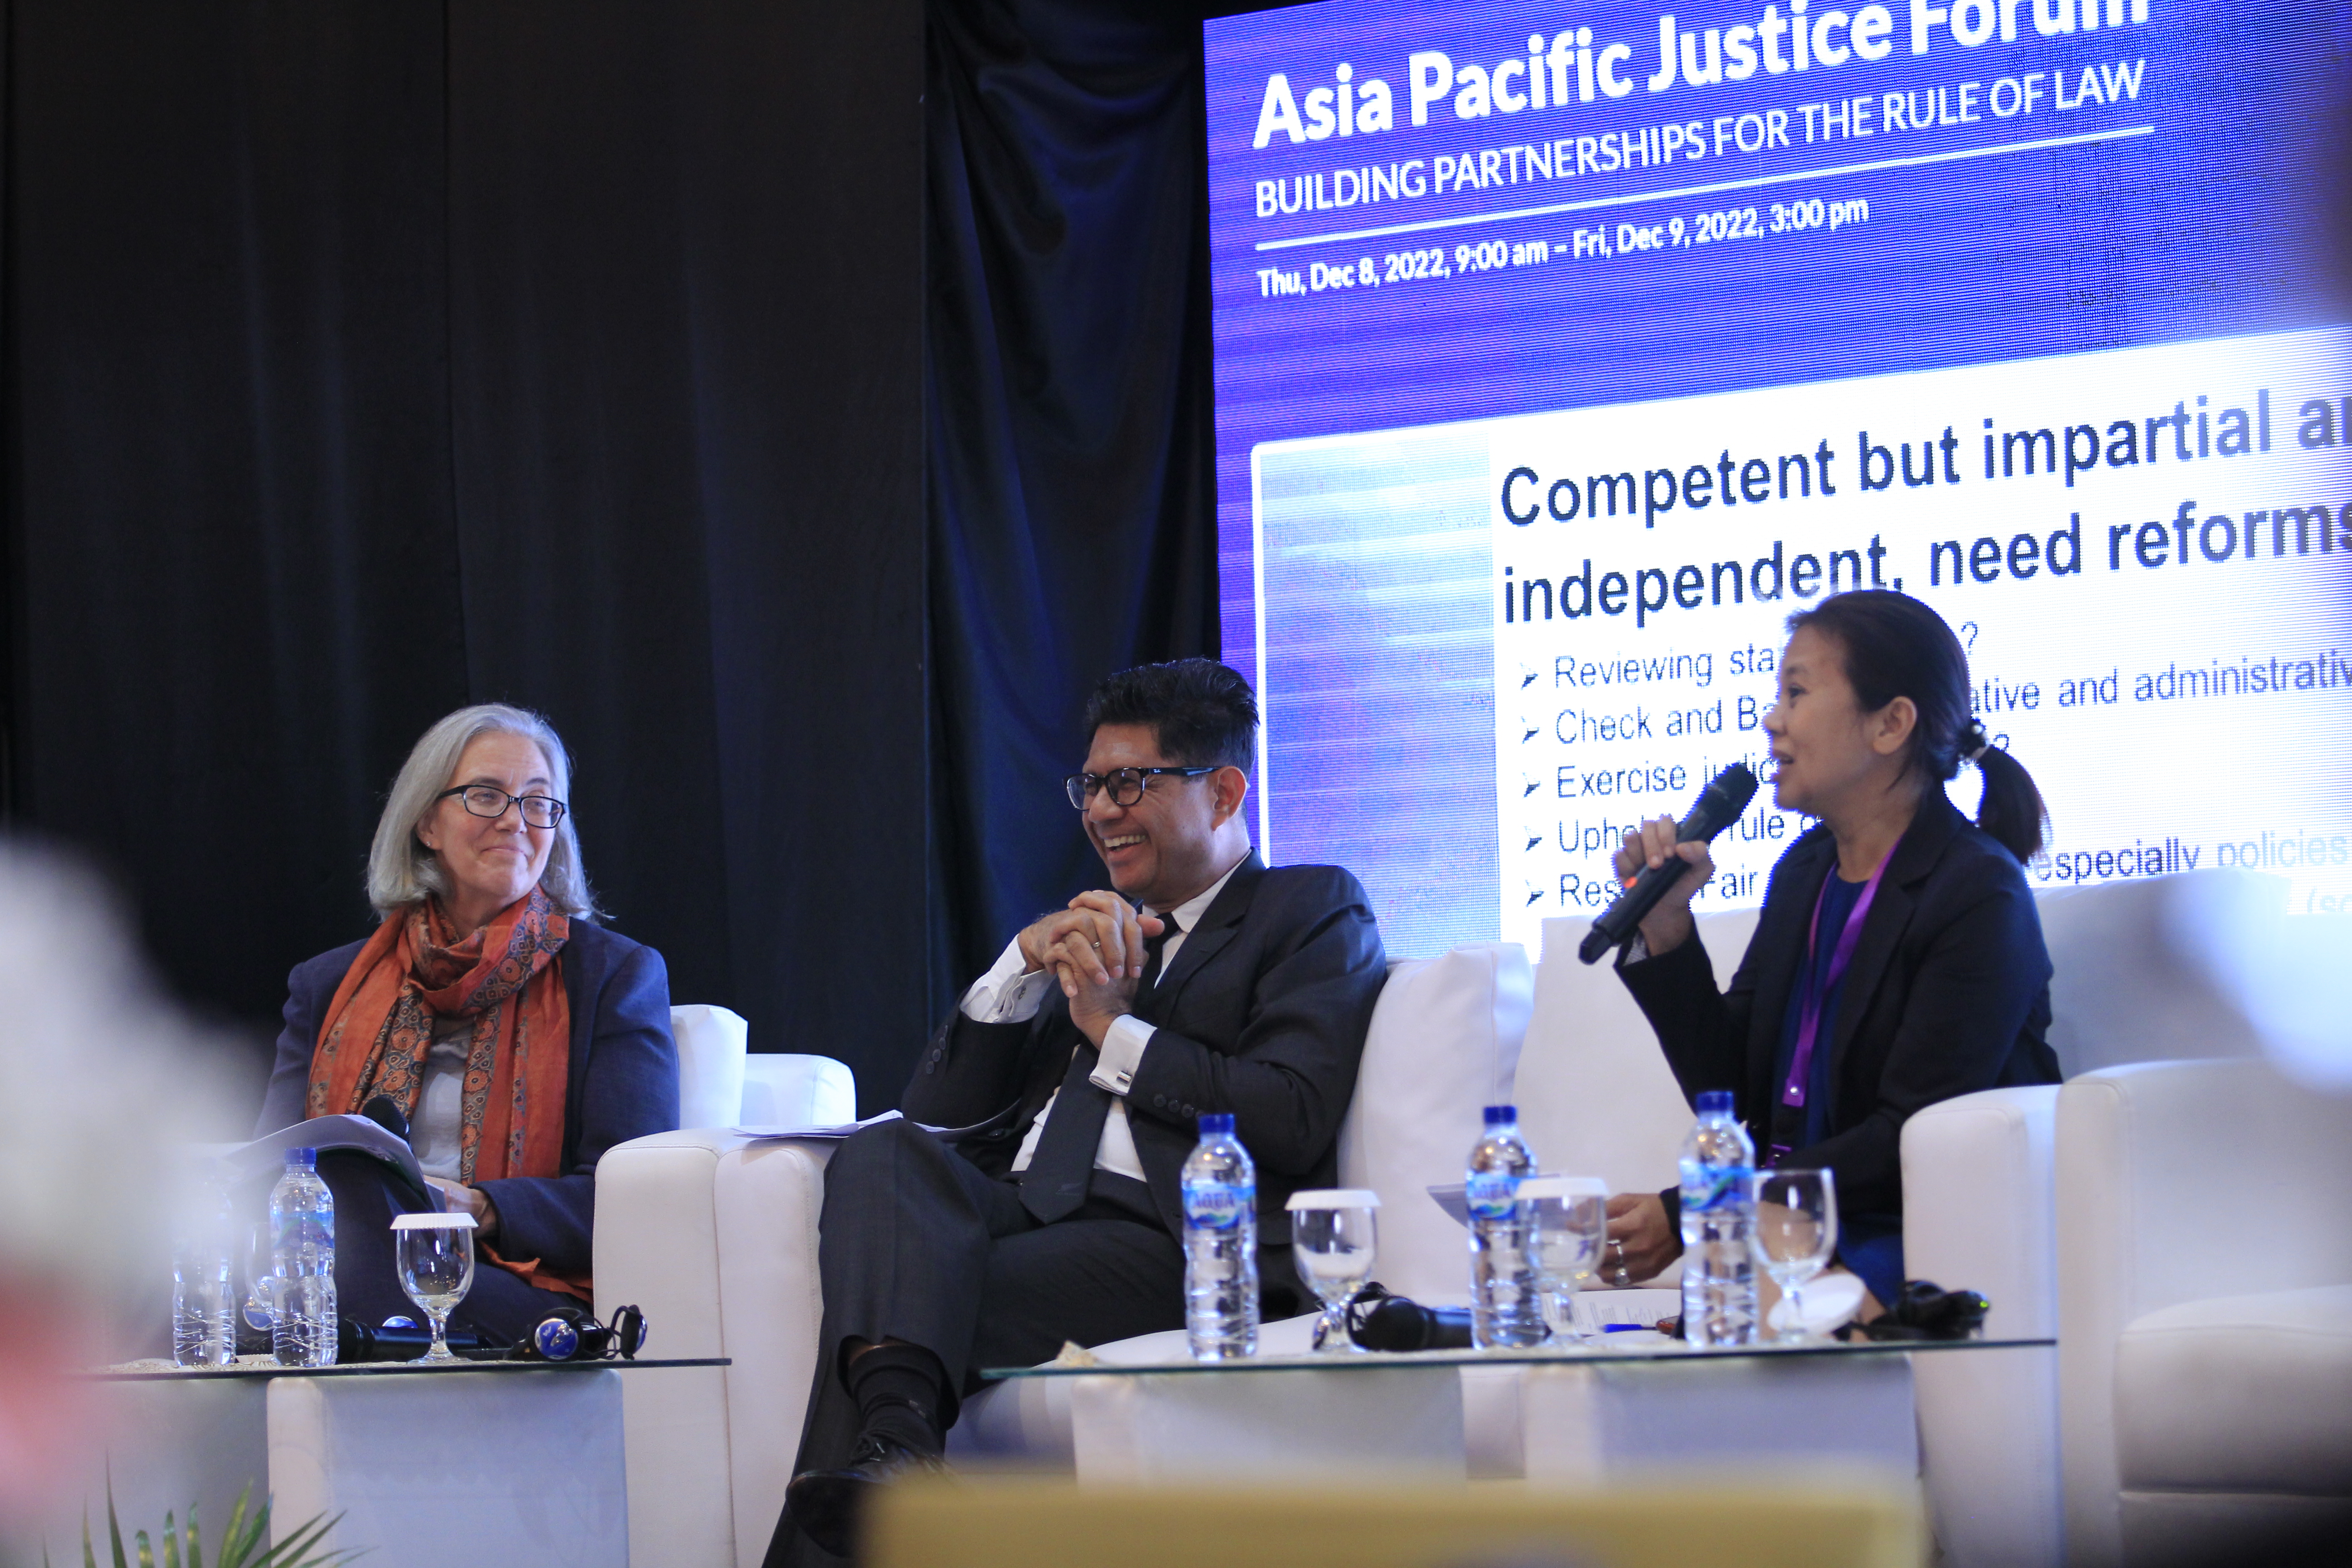 Panelists discuss challenge and best practices during the Interactive Session on Independent Judiciary and the Rule of Law.   